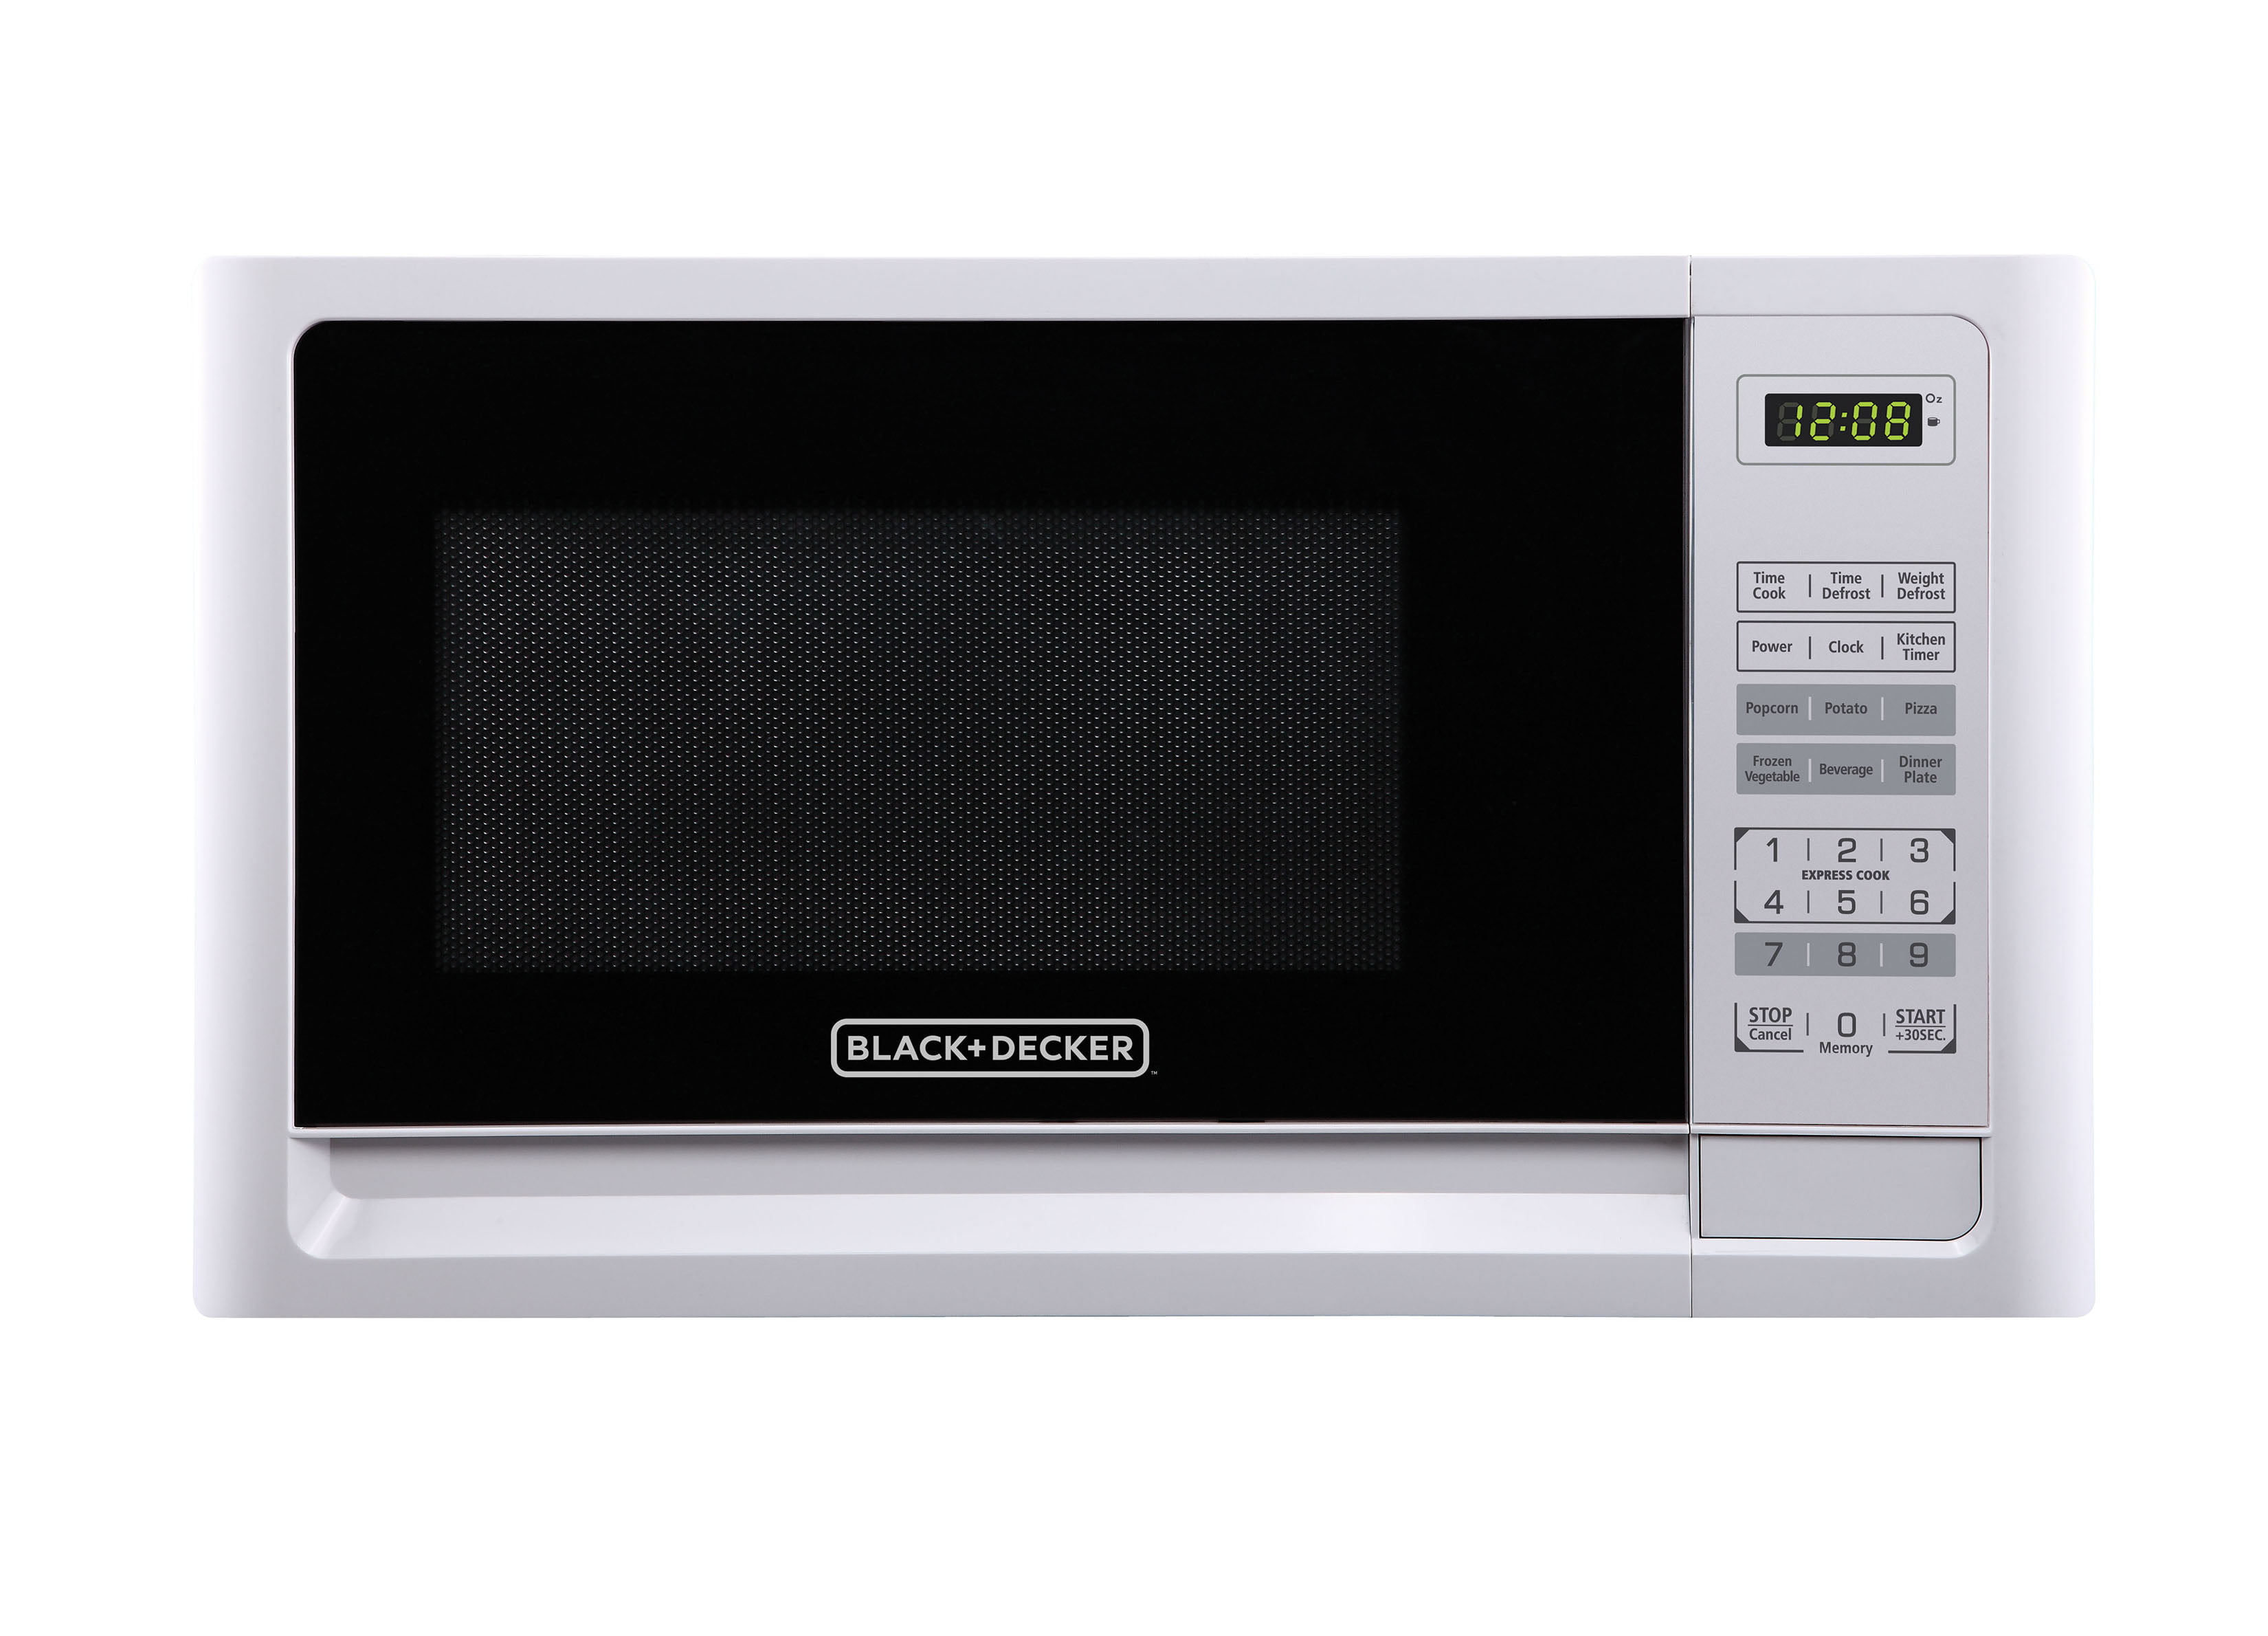 Black & Decker EM925AME-P1 0.9 cu.ft. 900W Microwave Oven, Stainless Steel/ Black 